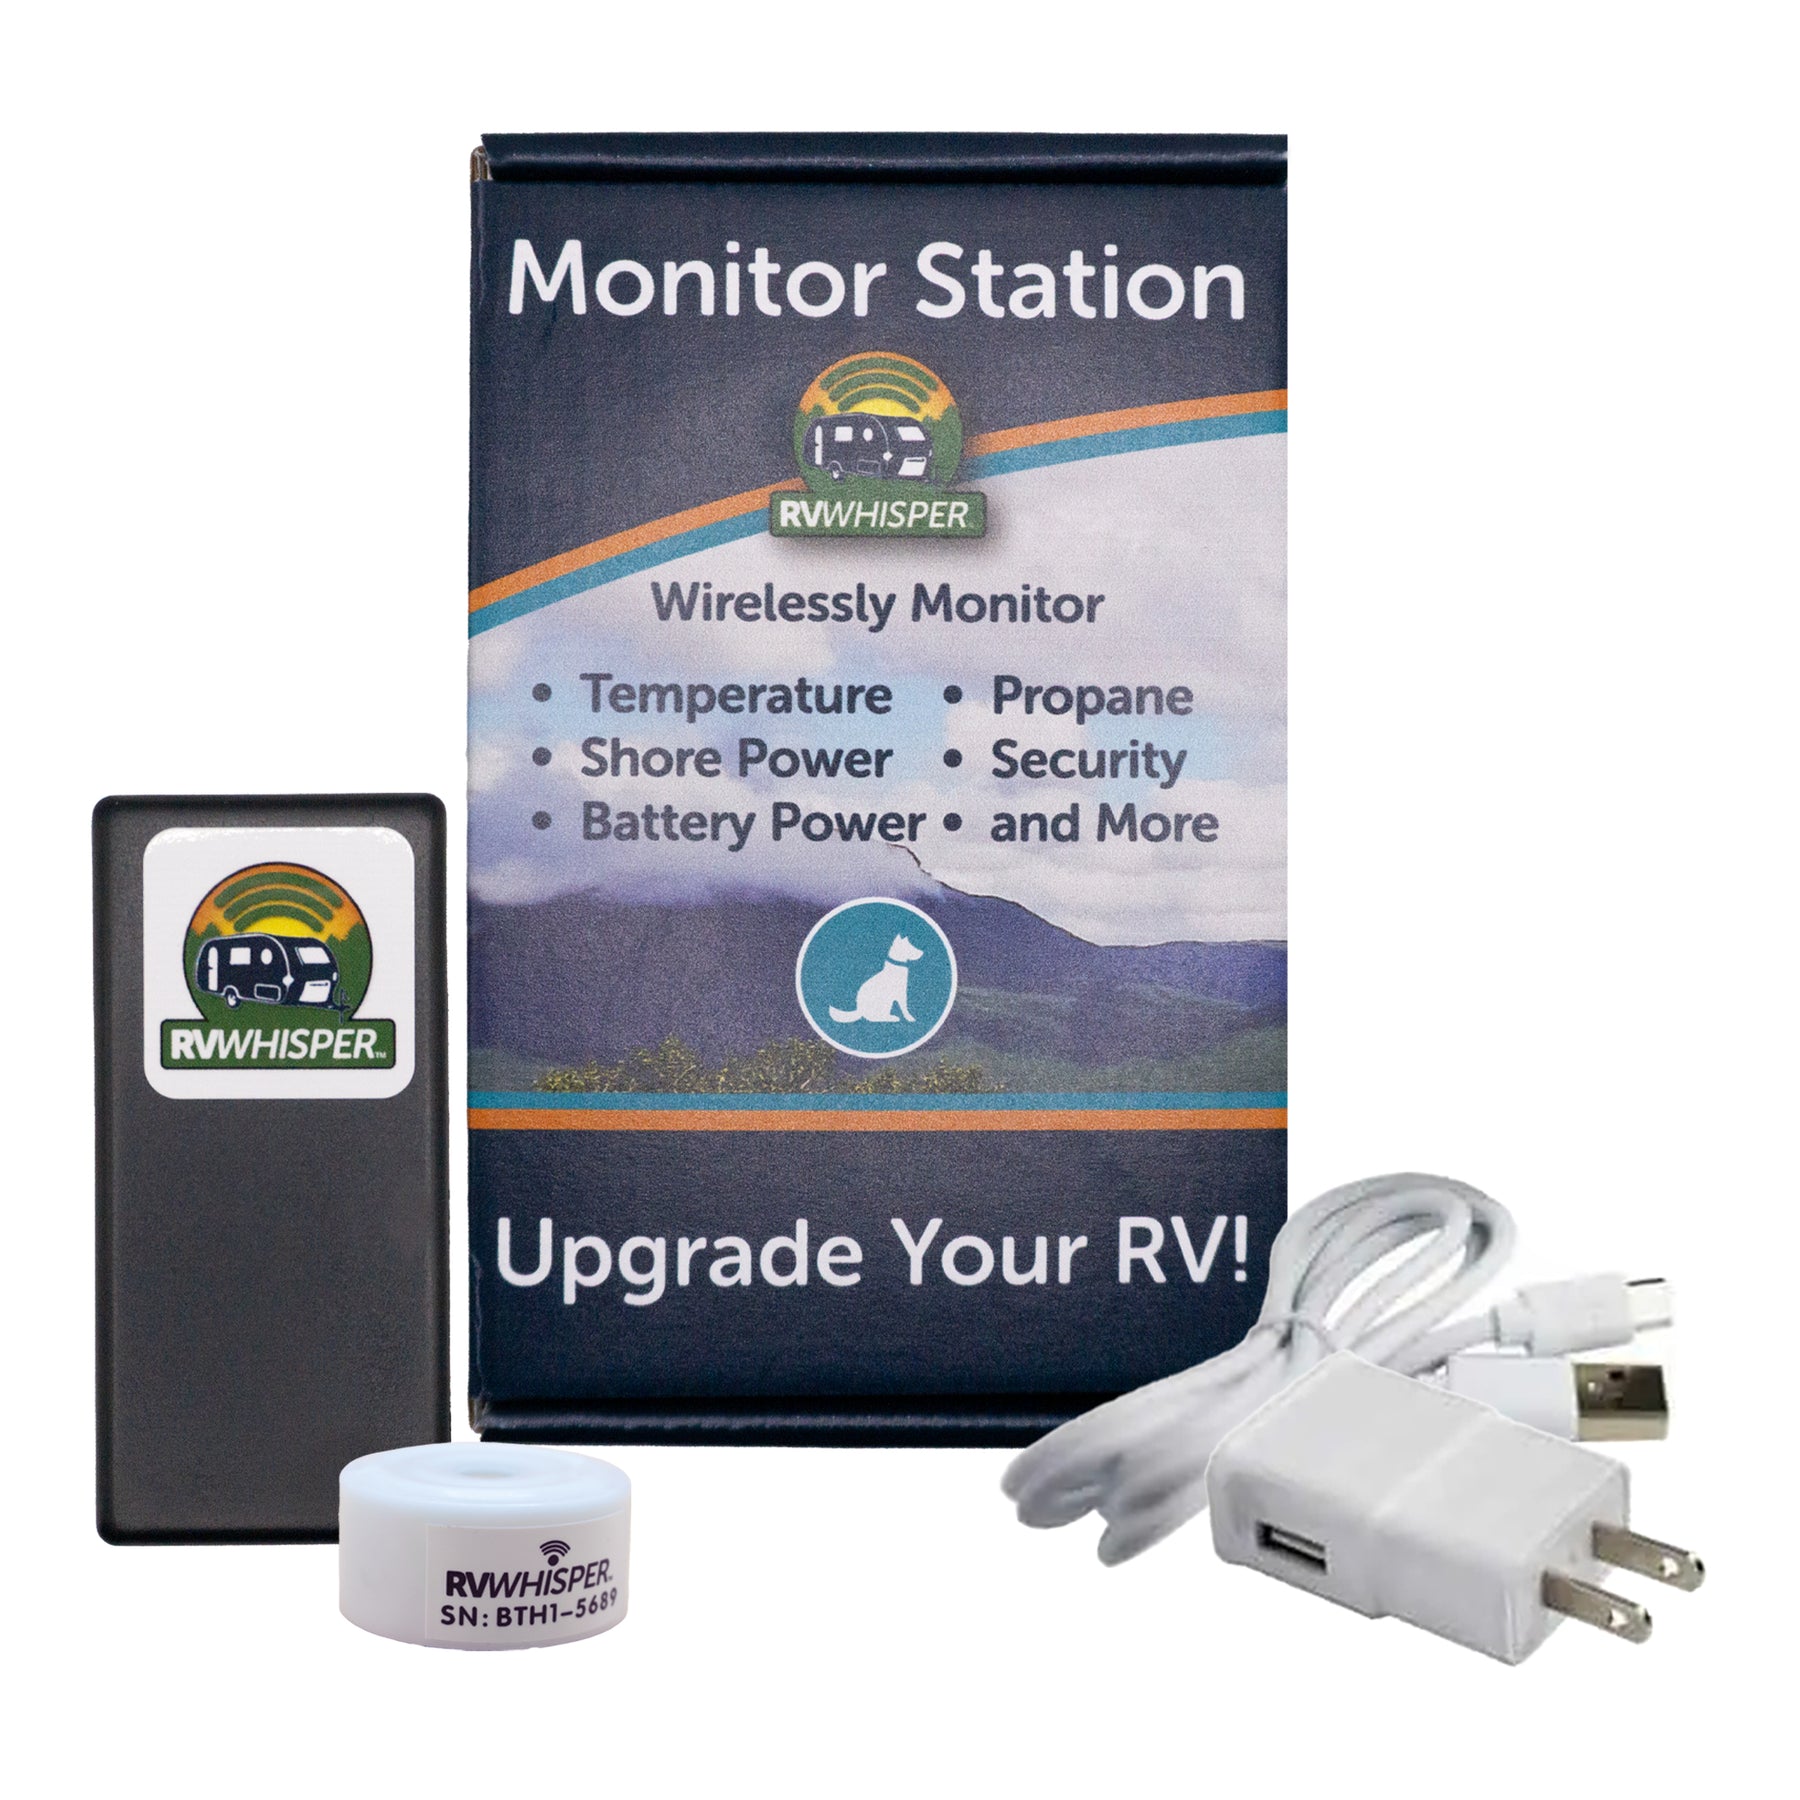 Monitor Rv Temperature Remotely To Keep Your Pets Safe While Away 